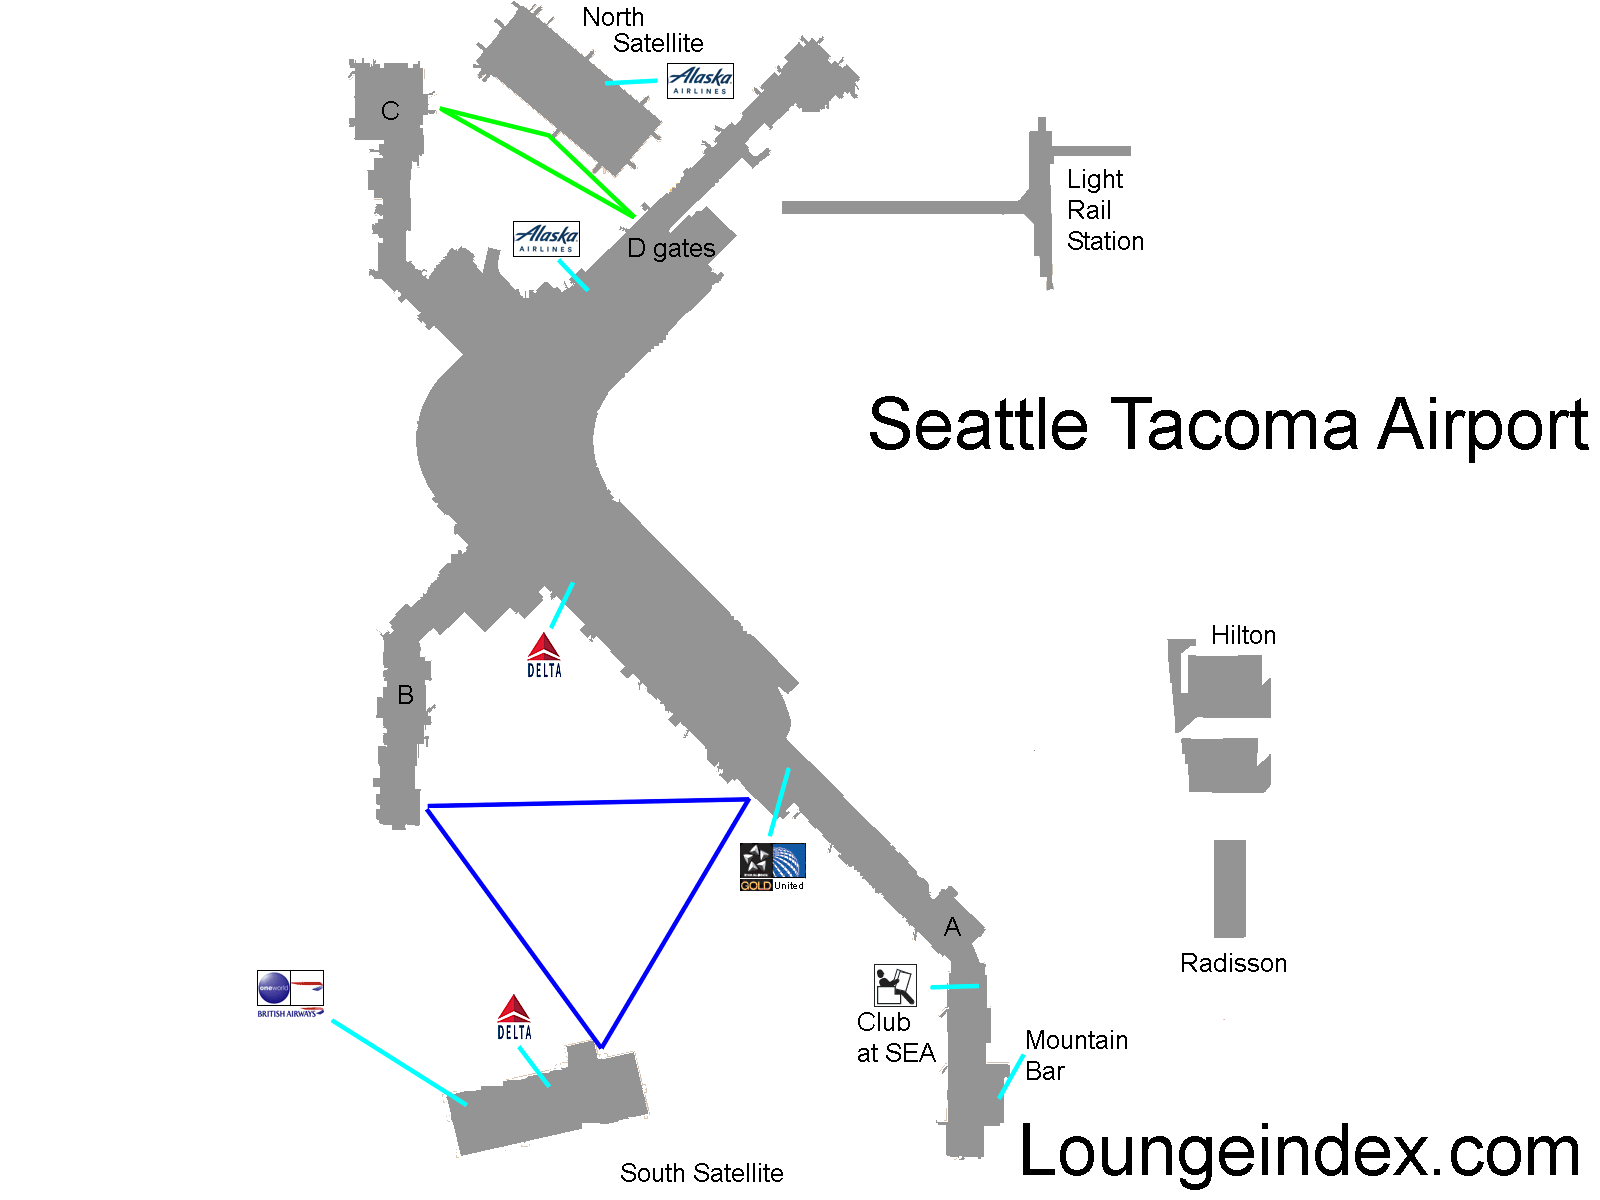 Seatac Airline Route Map